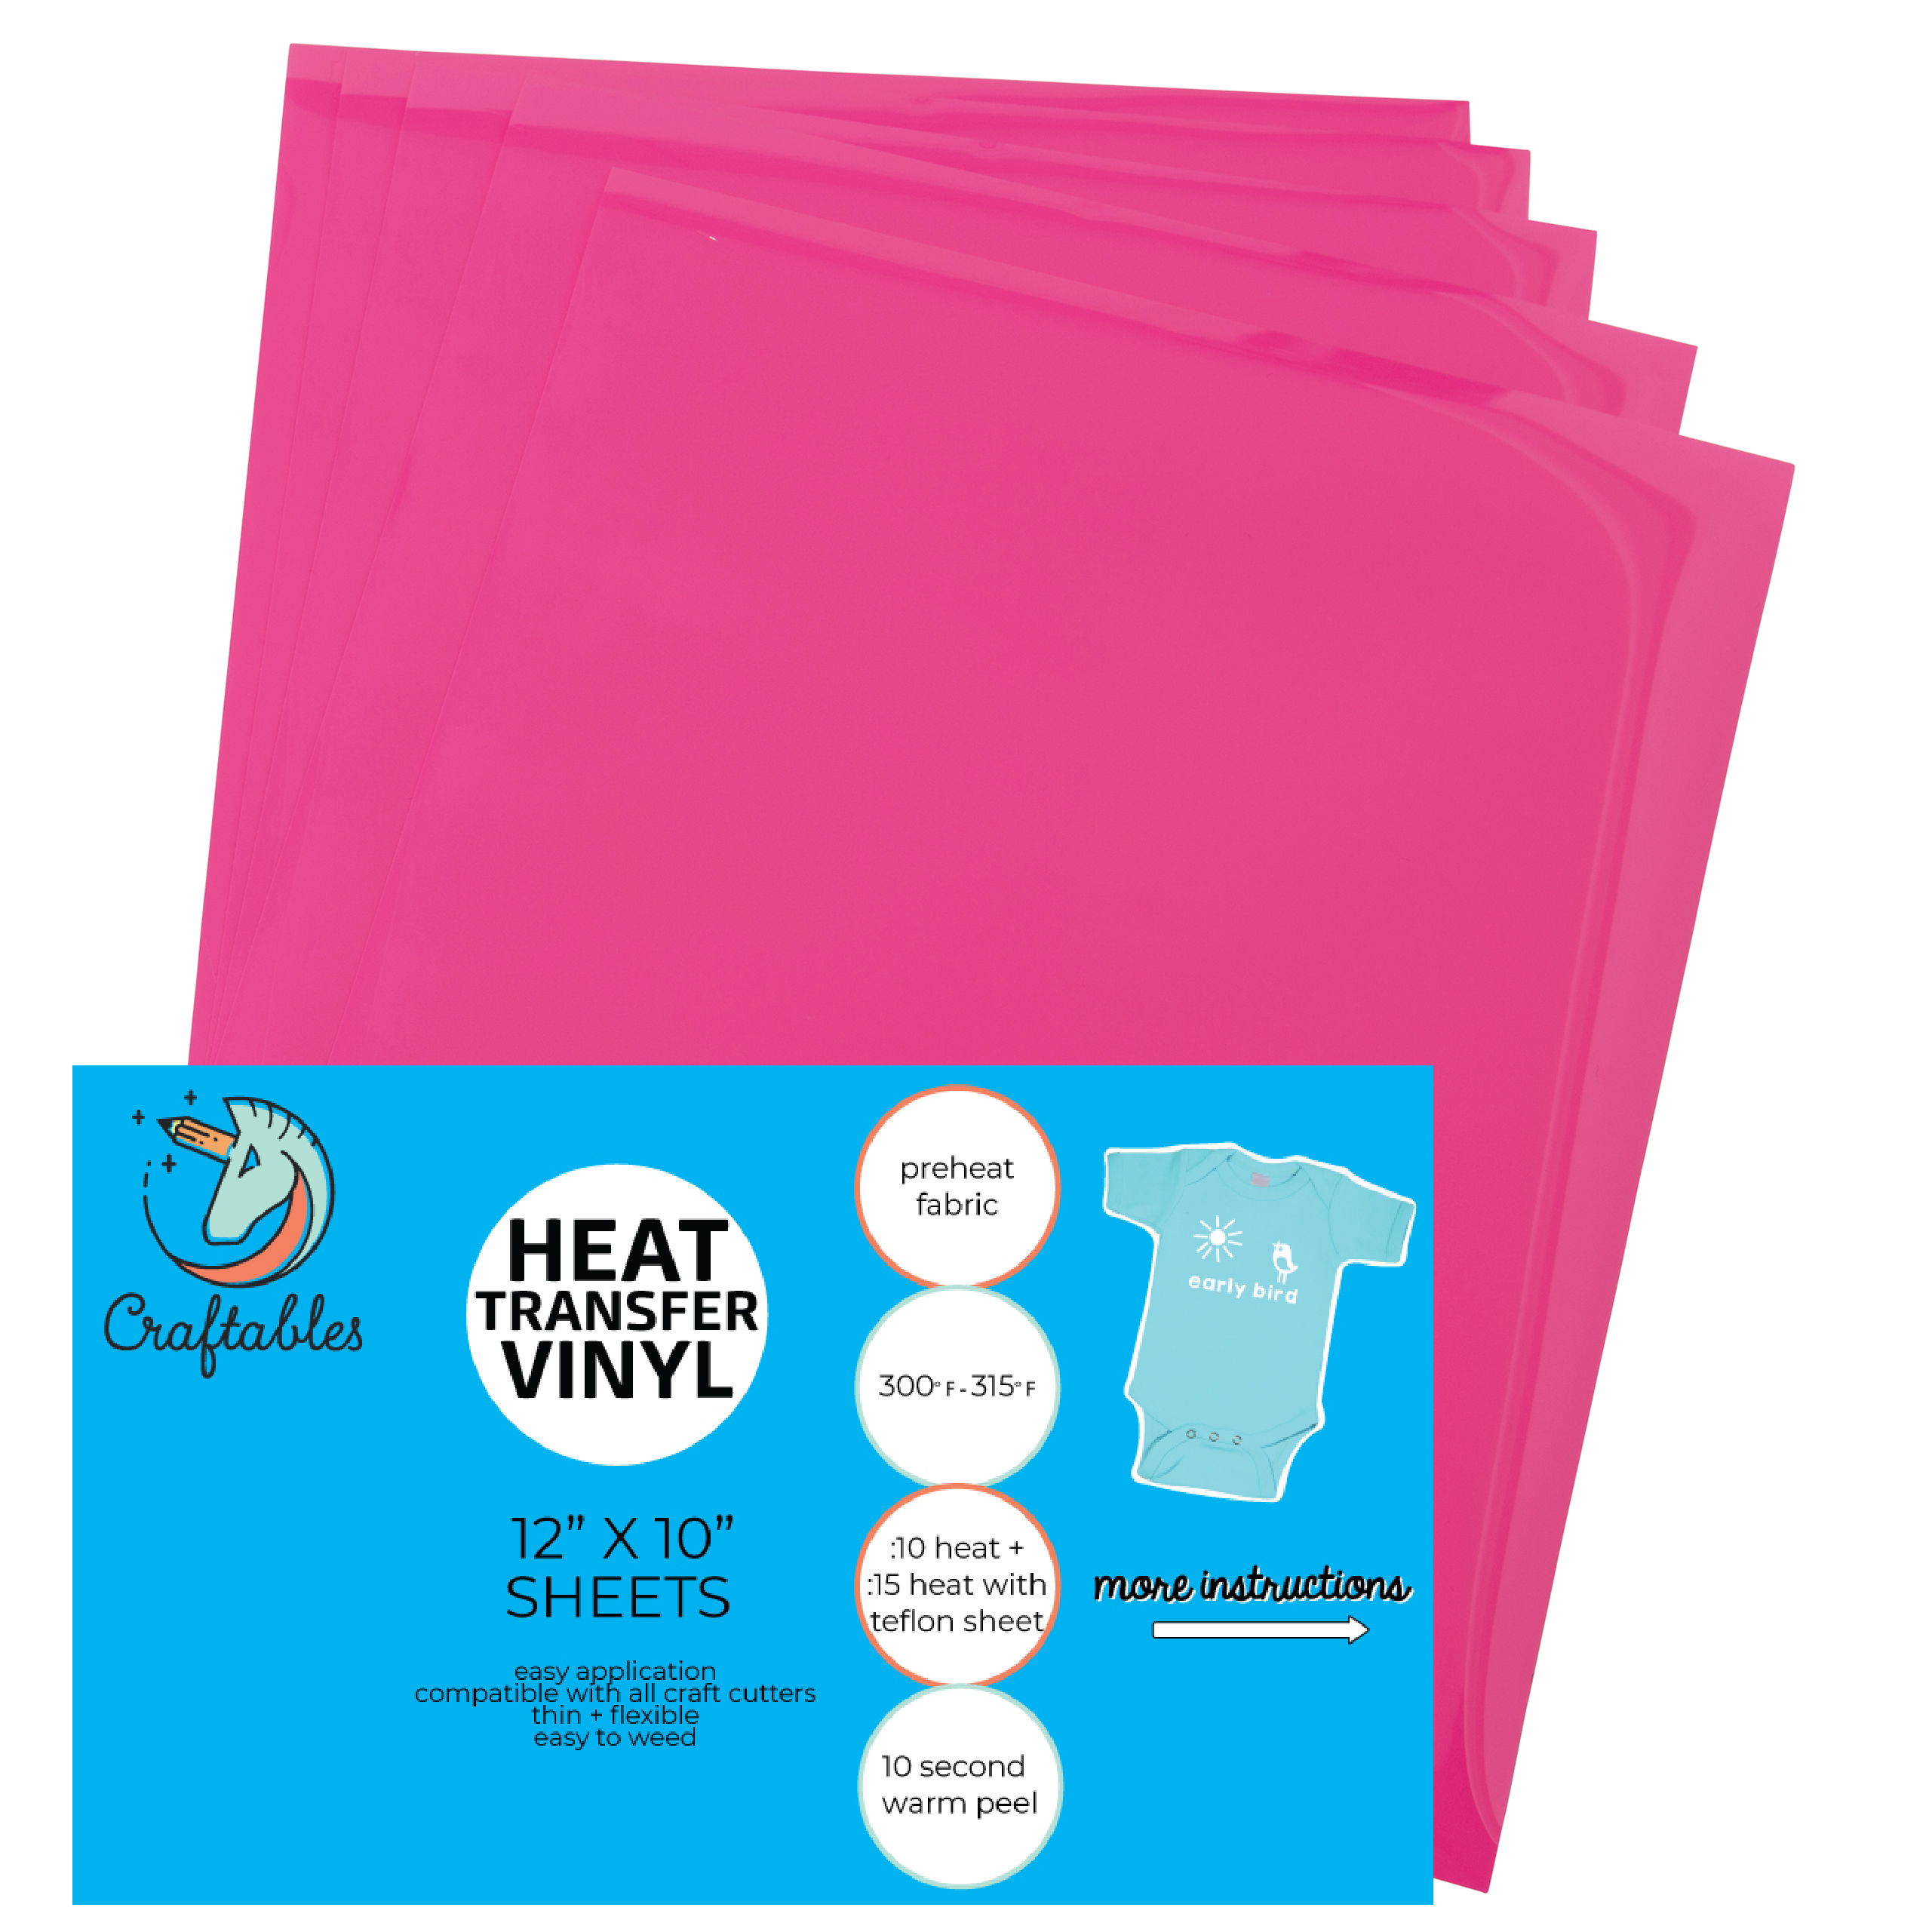 Craftables Hot Pink Heat Transfer Vinyl HTV - 5 Sheets Easy to Weed Tshirt  Iron on Vinyl for Silhouette Cameo, Cricut, all Craft Cutters. Ships Flat 